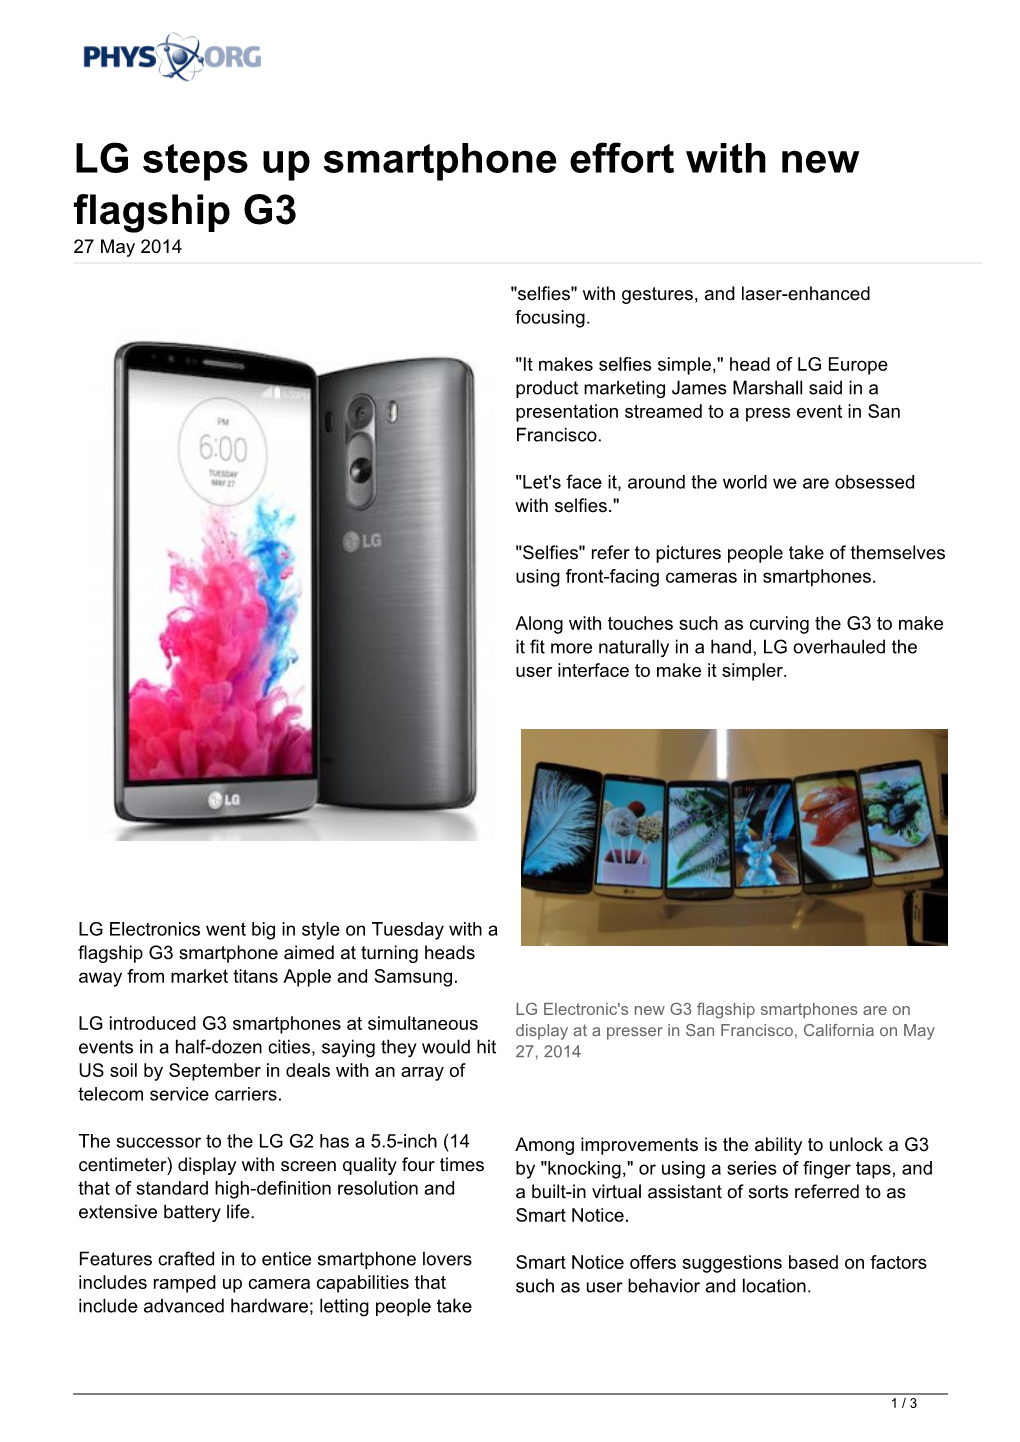 LG Steps up Smartphone Effort with New Flagship G3 27 May 2014